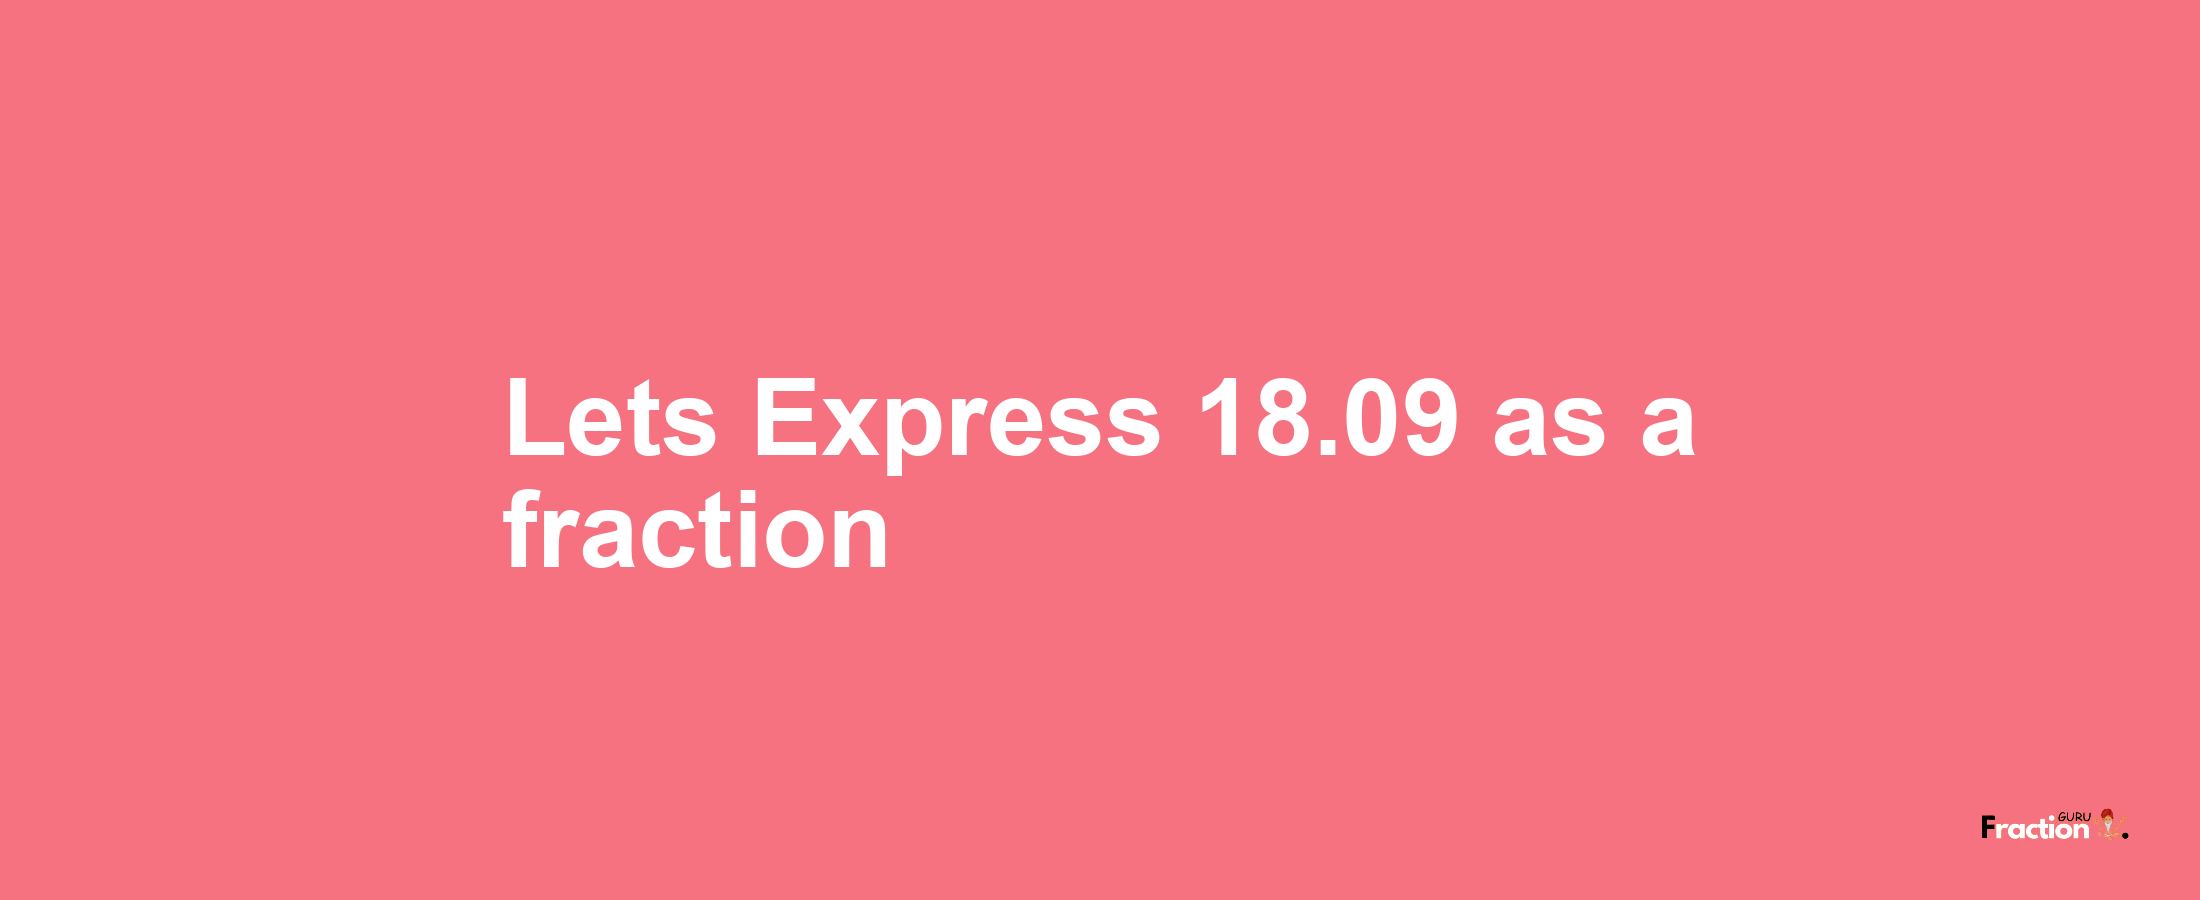 Lets Express 18.09 as afraction